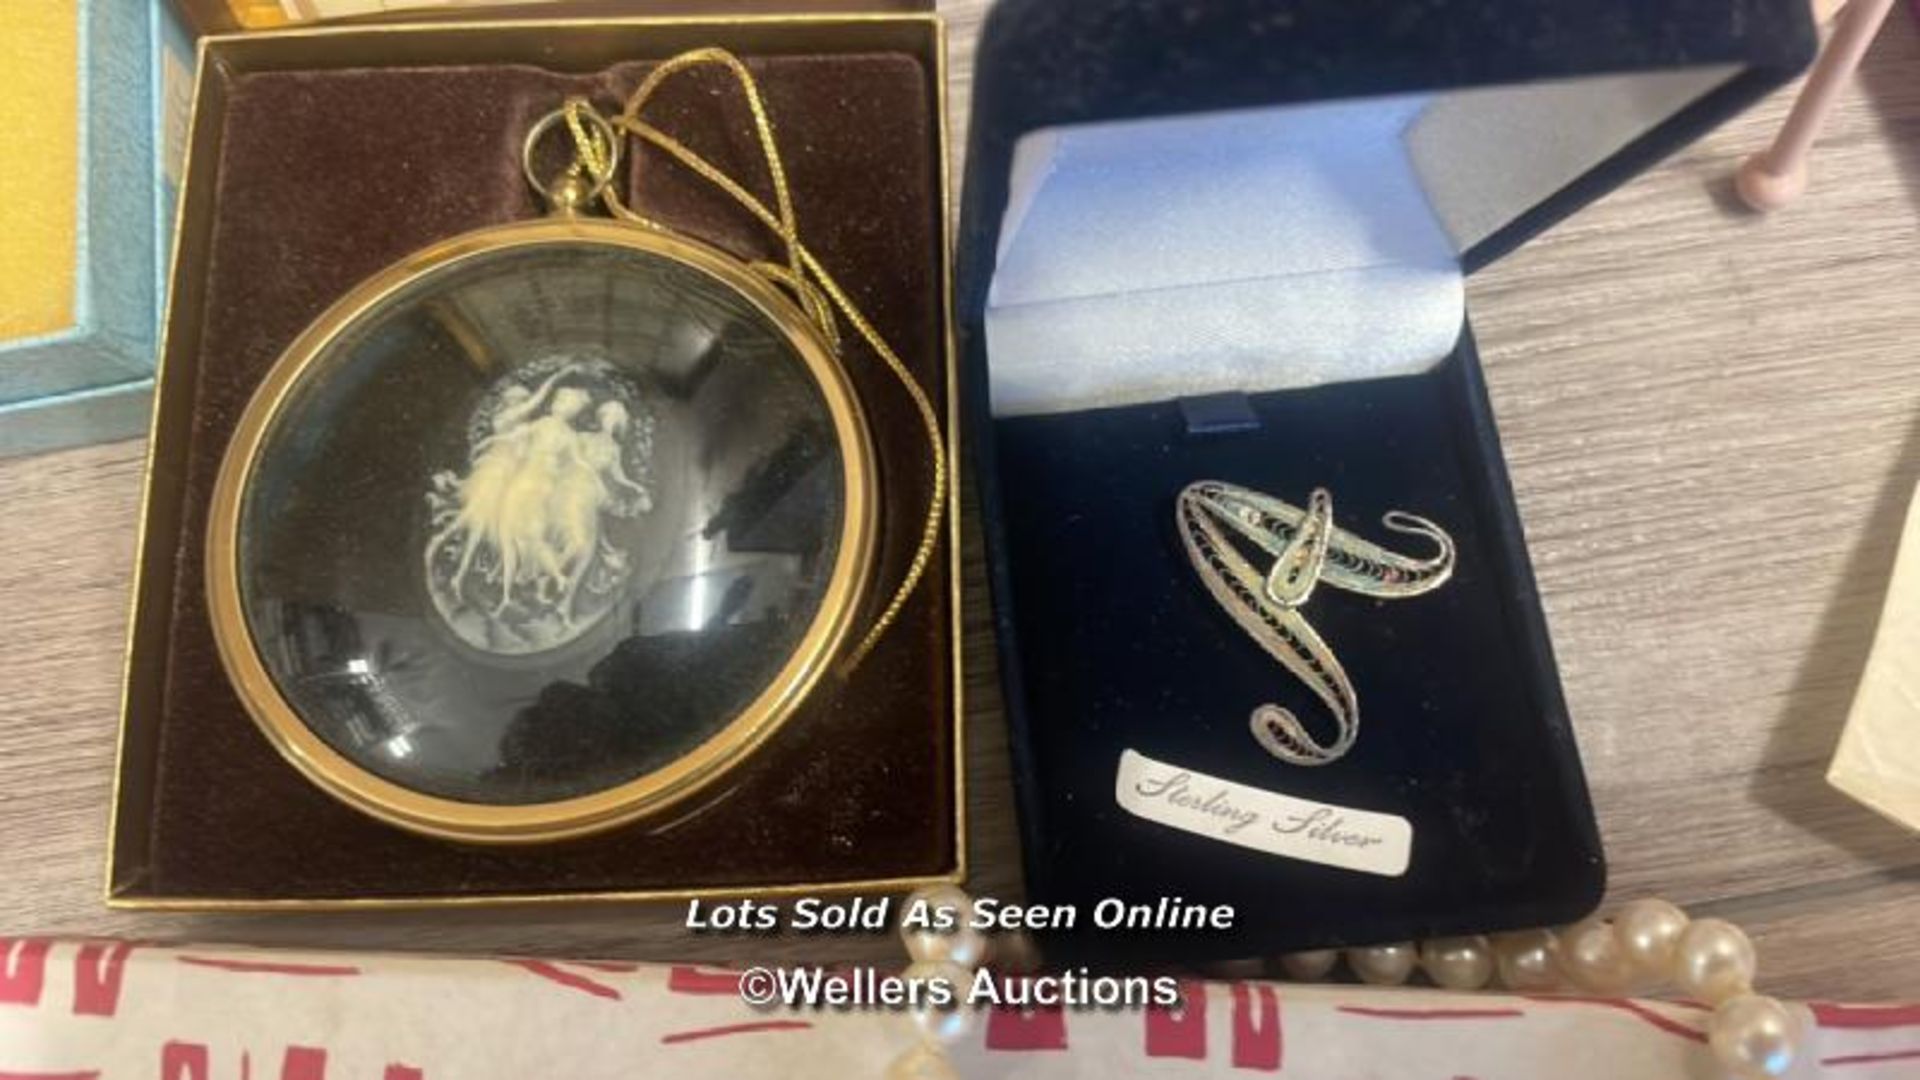 A LARGE QUANTITY OF COSTUME JEWELLERY, COMPACTS AND WATCHES - Image 10 of 12